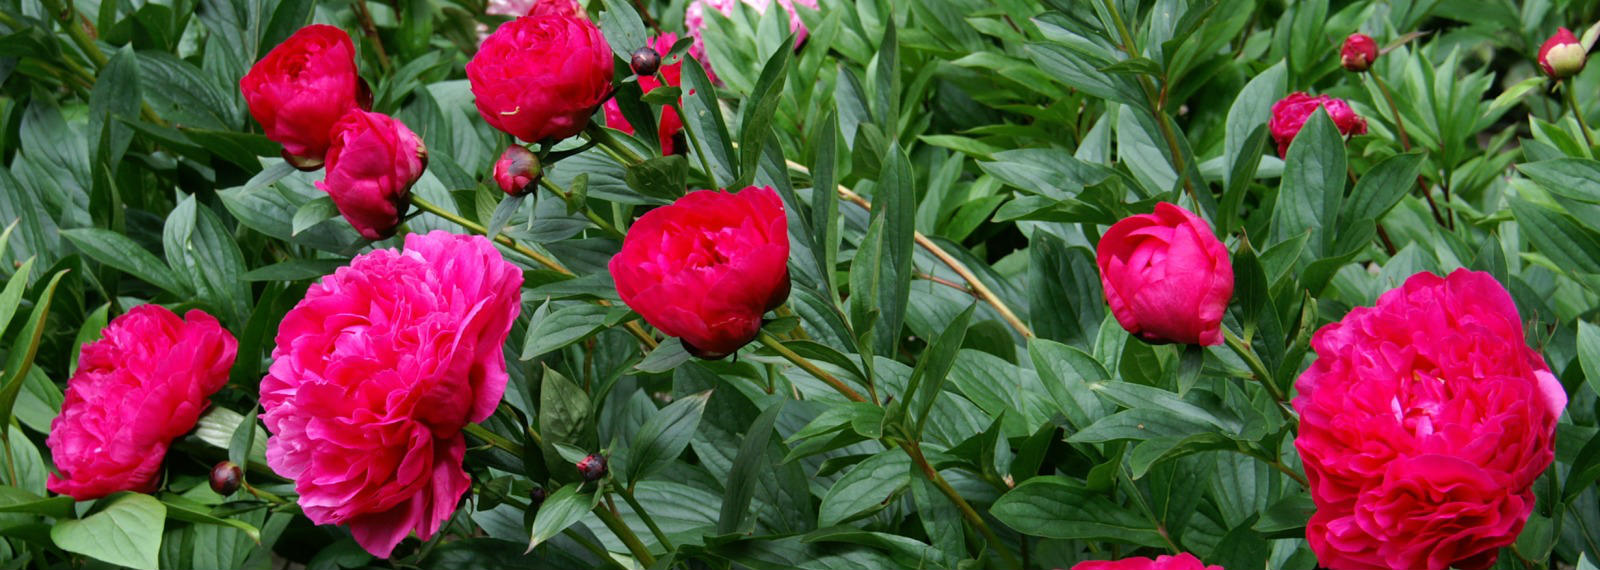 Mail order delivery of potted peonies